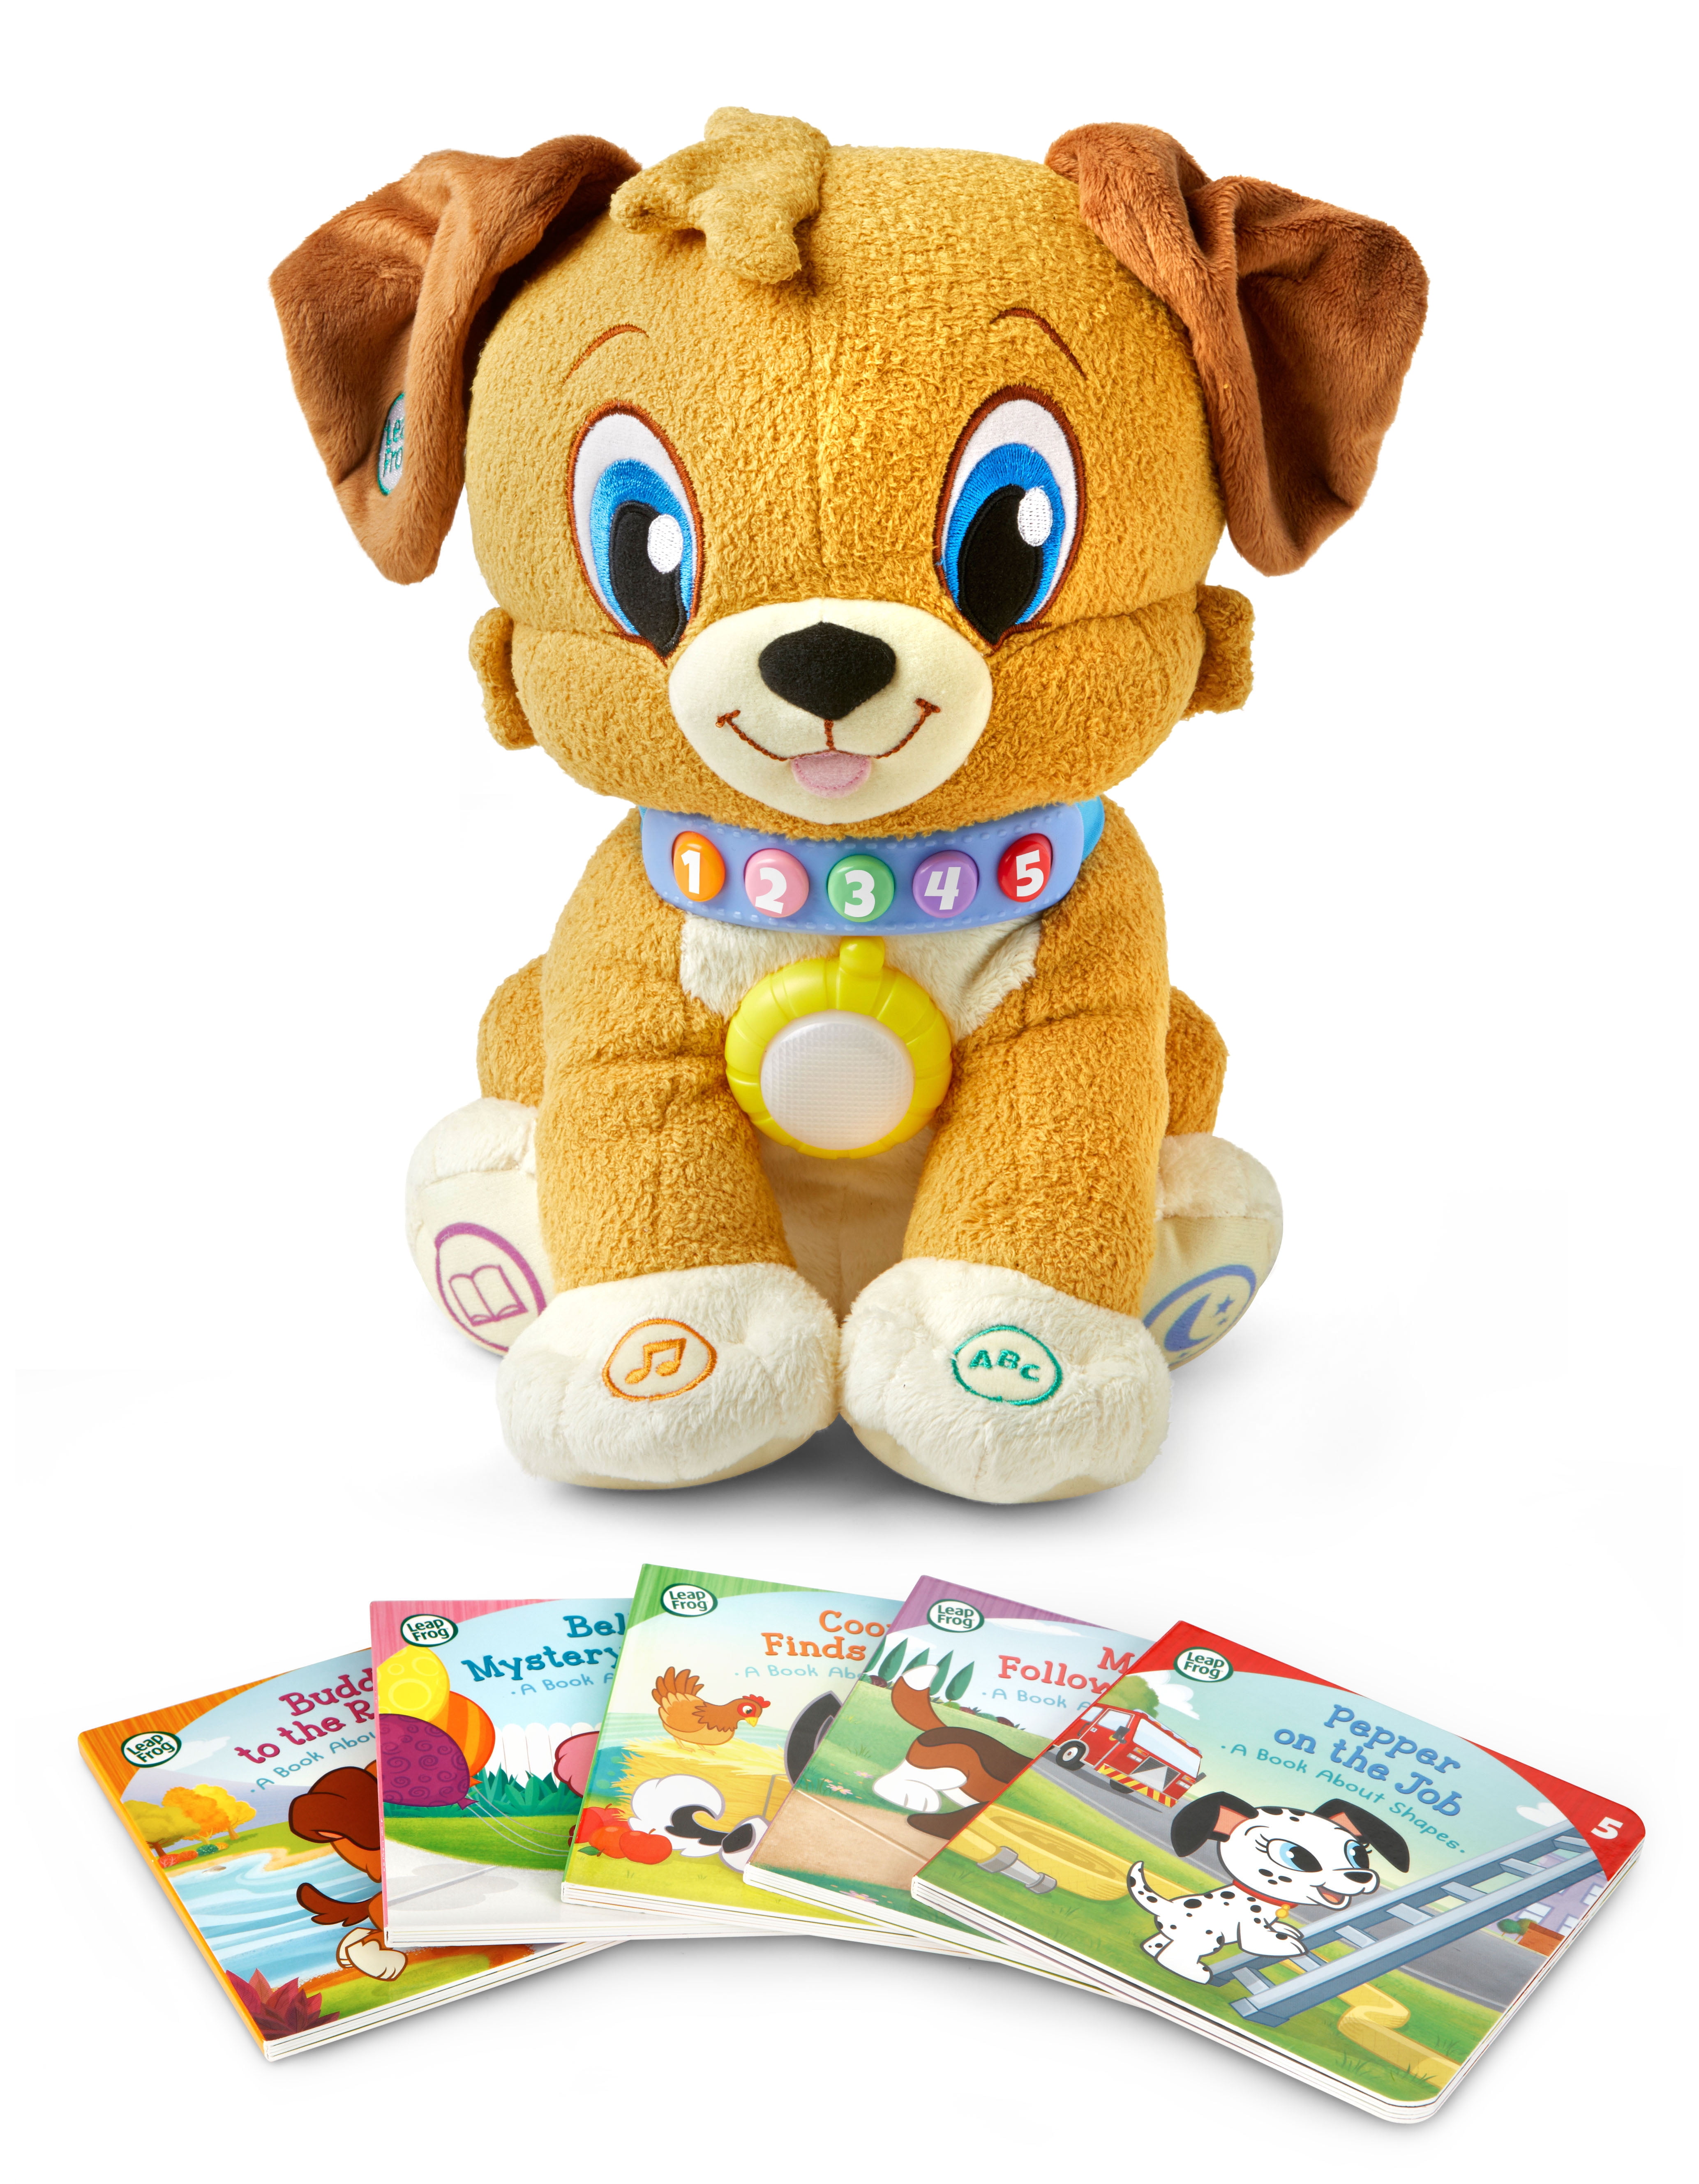 603553 for sale online LeapFrog Storytime Bella 23cm Interactive Toy 